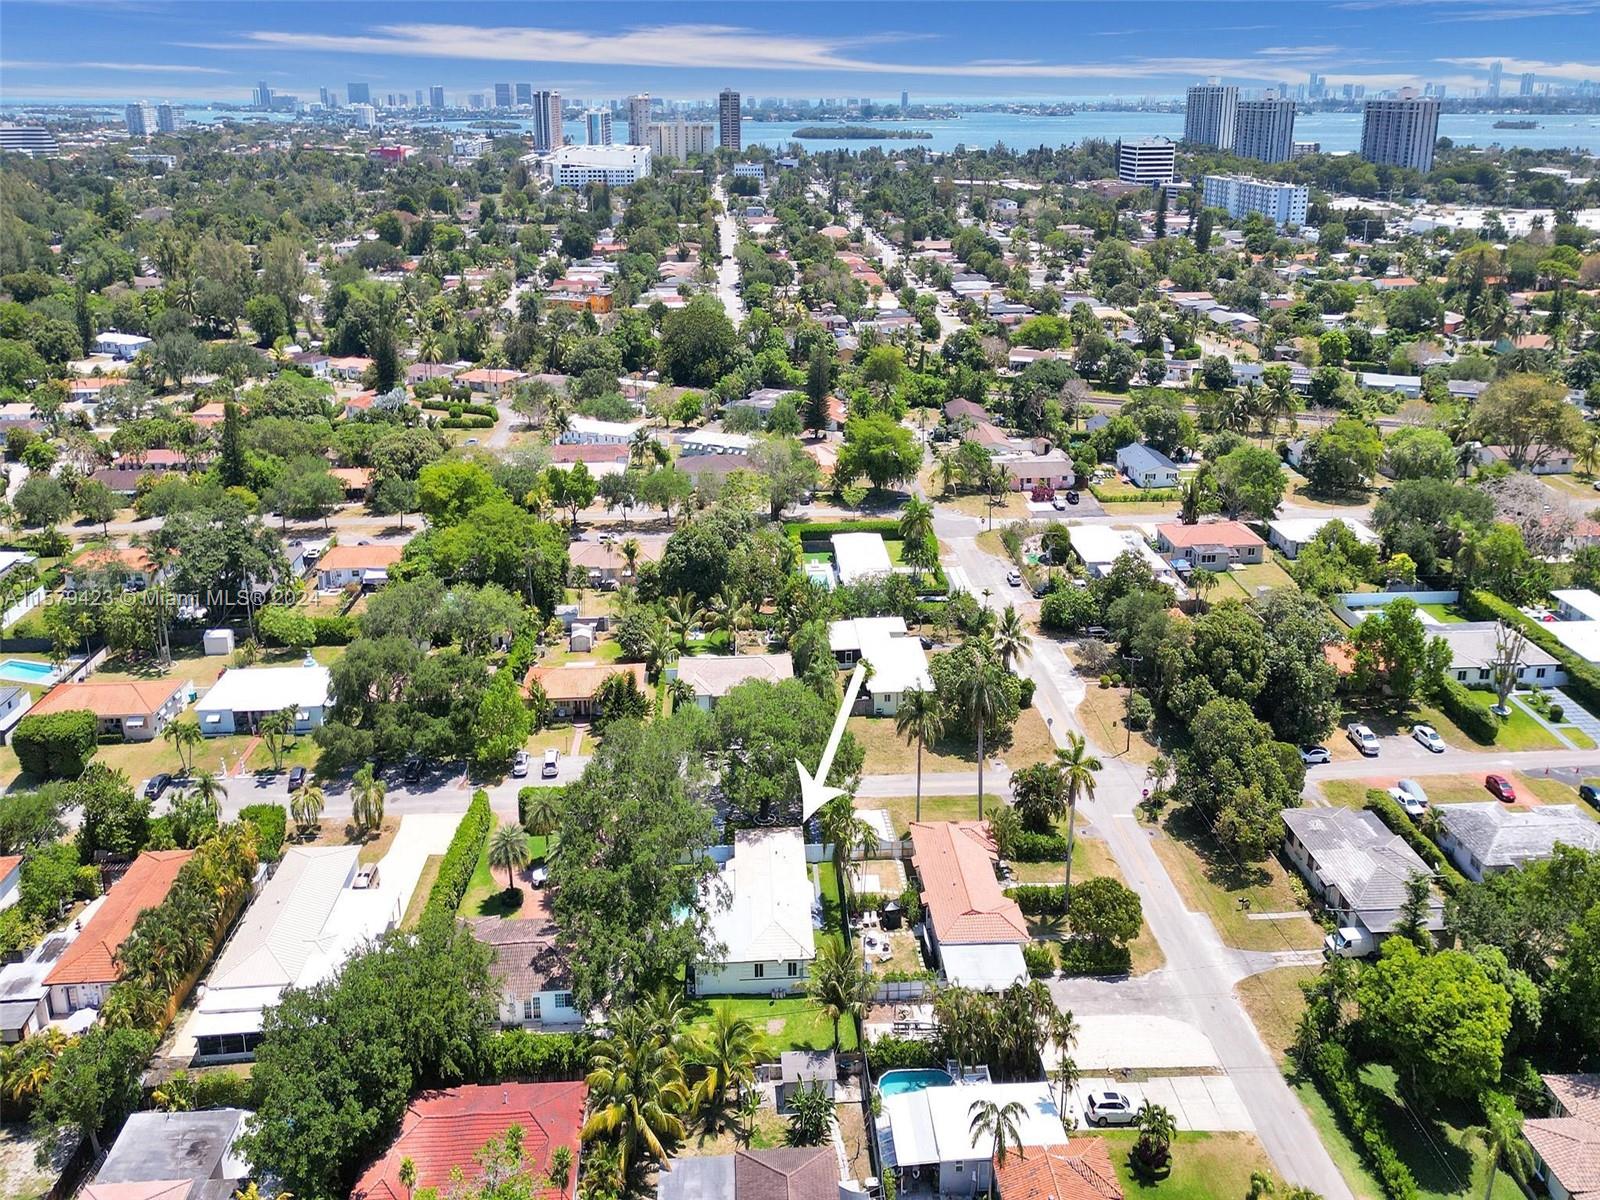 an aerial view of residential houses with city view